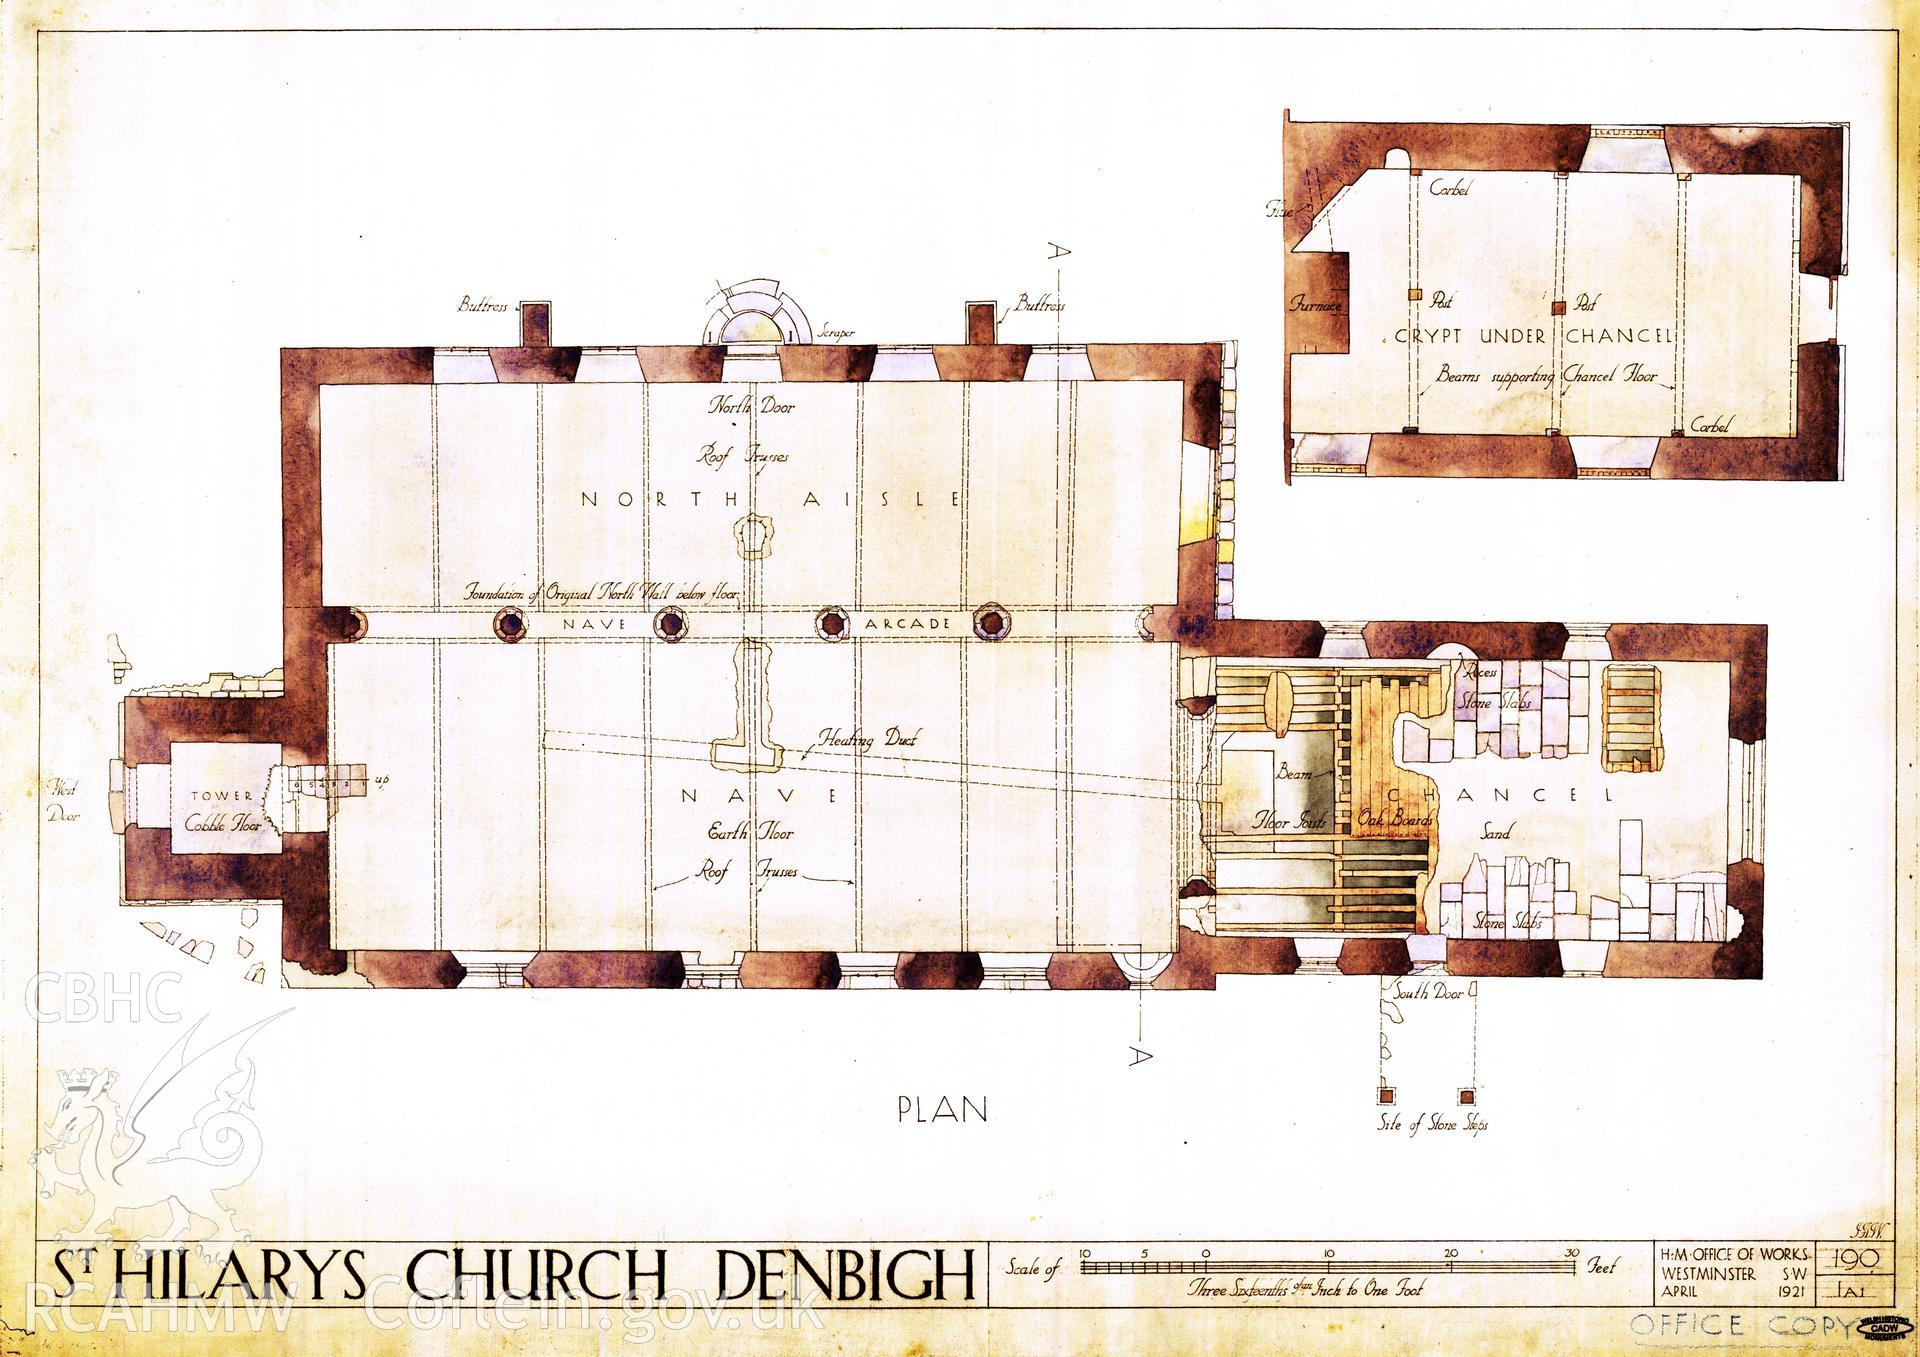 Cadw guardianship monument drawing of Denbigh St Hillary's Church. Plan + crypt (tinted). Cadw Ref. No:190/1A1. Scale 1:64.